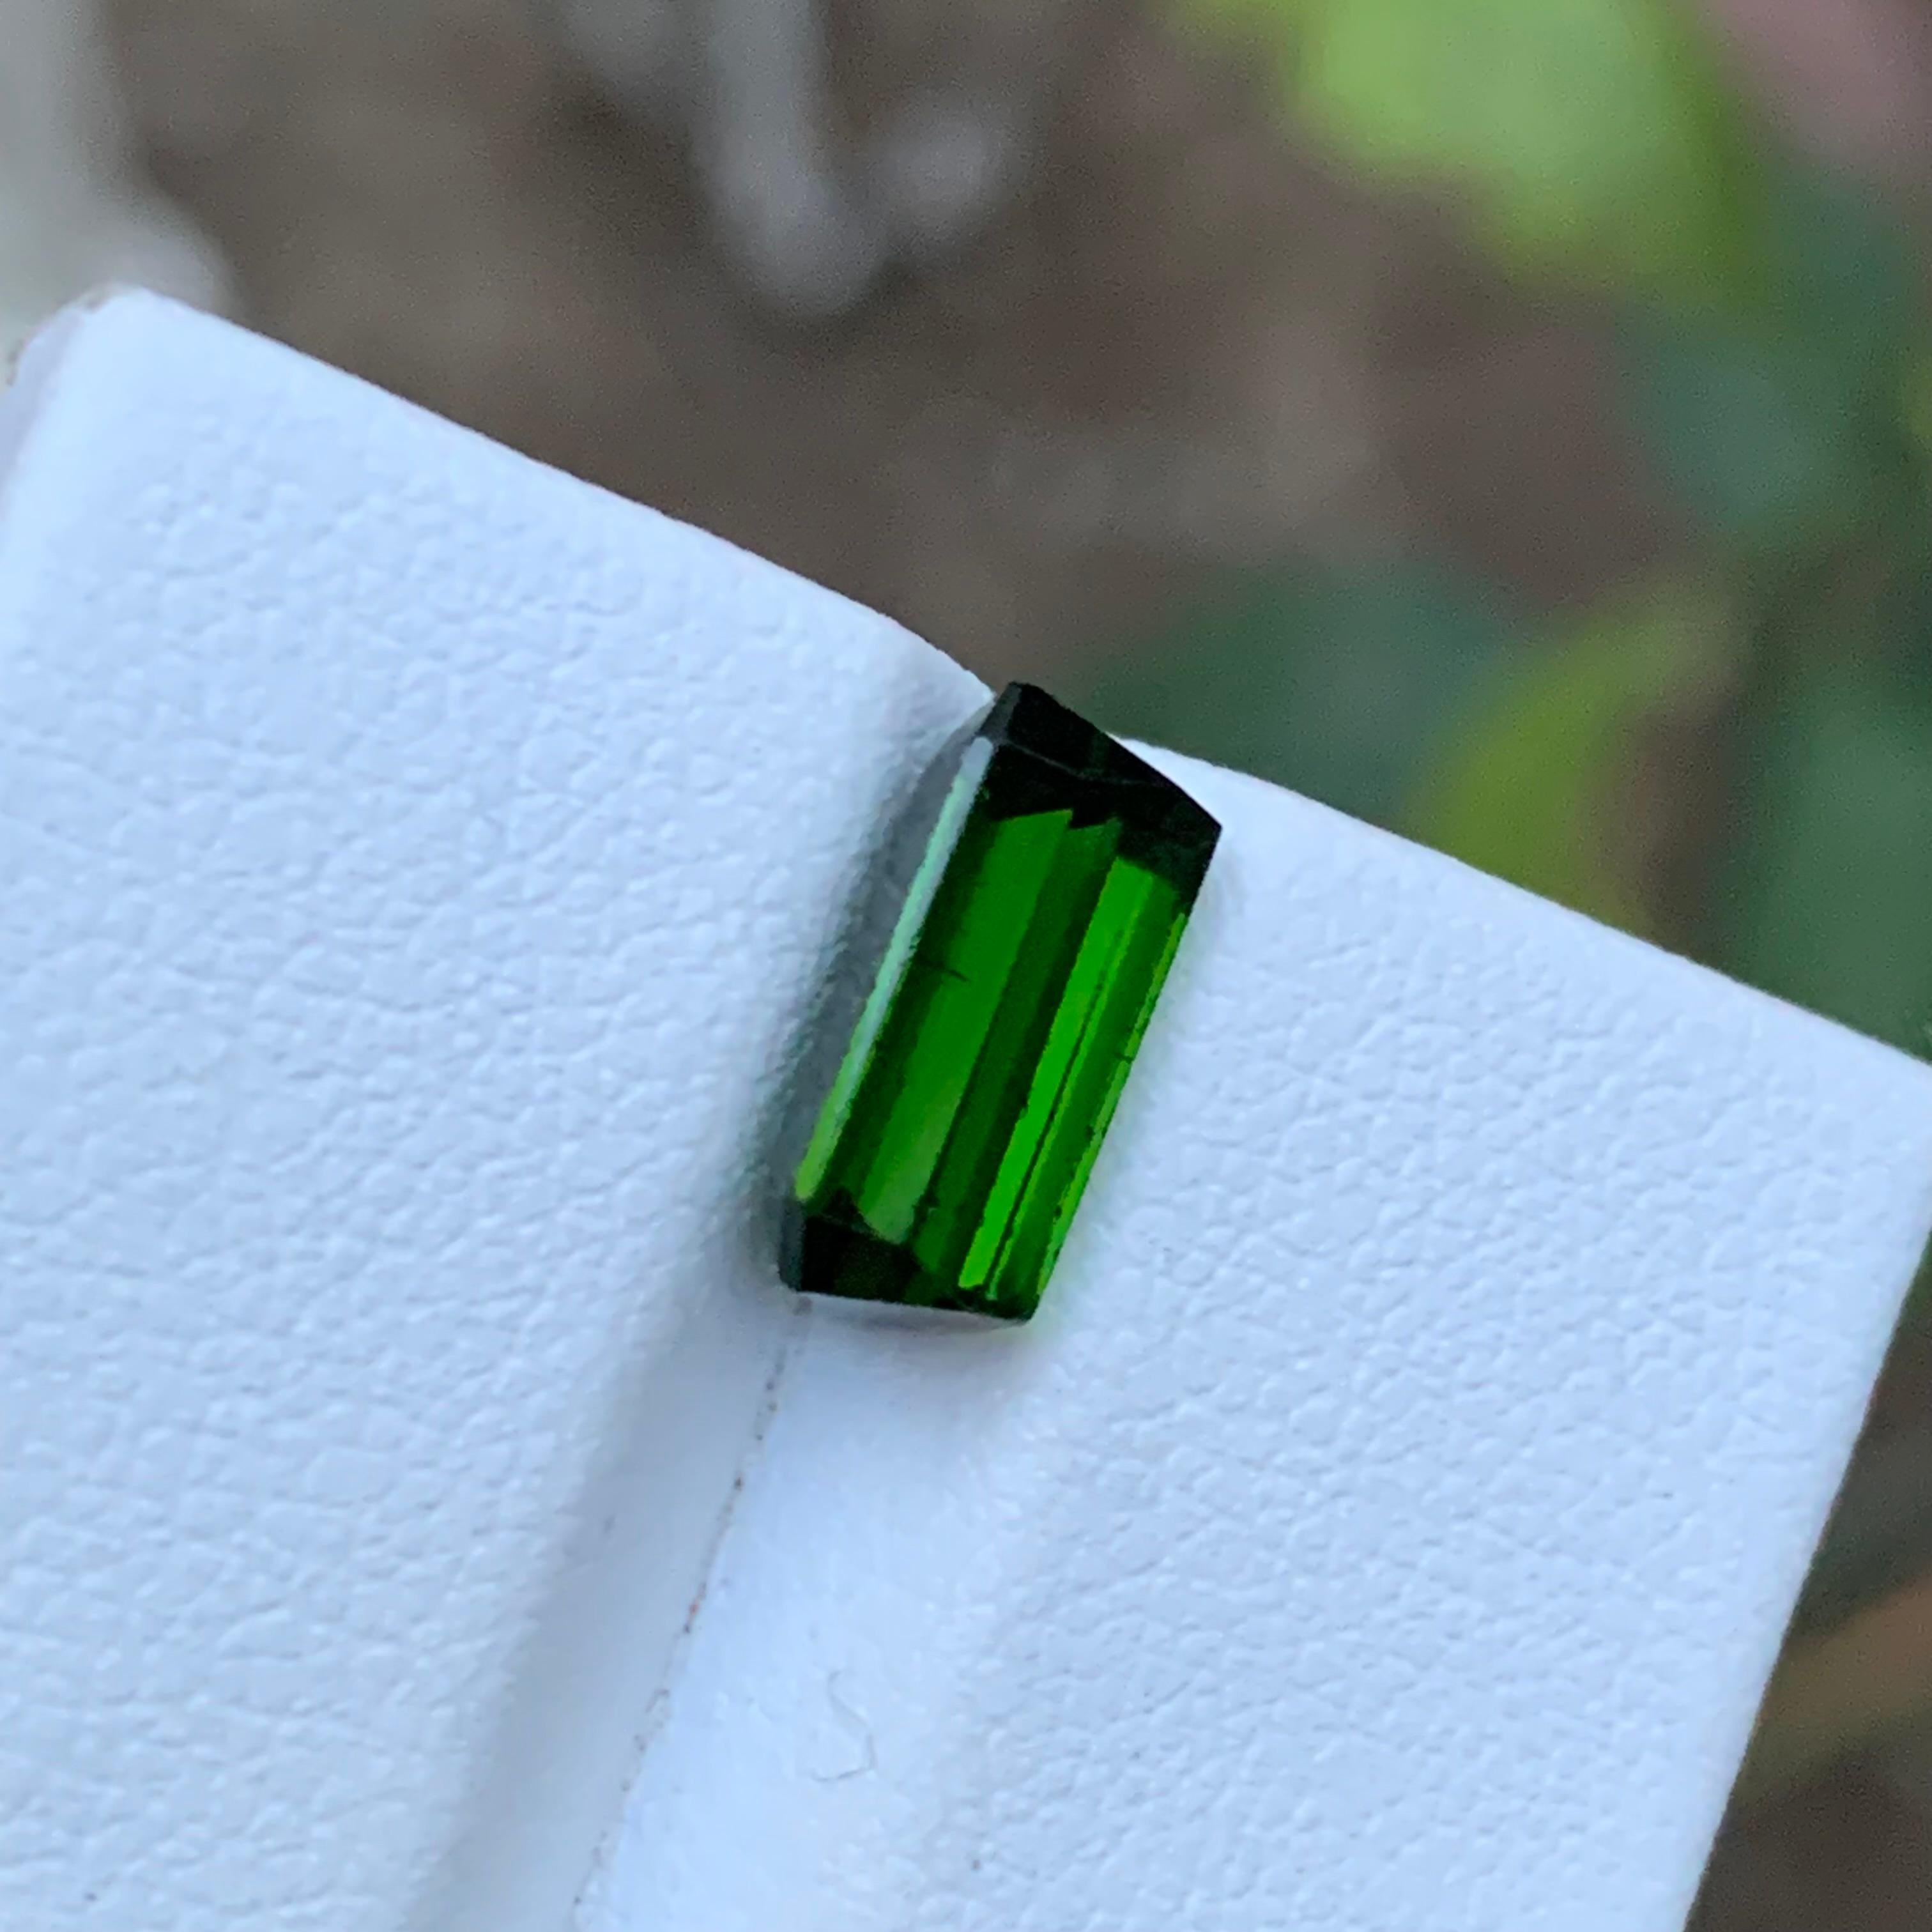 Rare Vivid Green Tourmaline Gemstone, 3.35 Ct Emerald Cut for Ring/Necklace For Sale 1